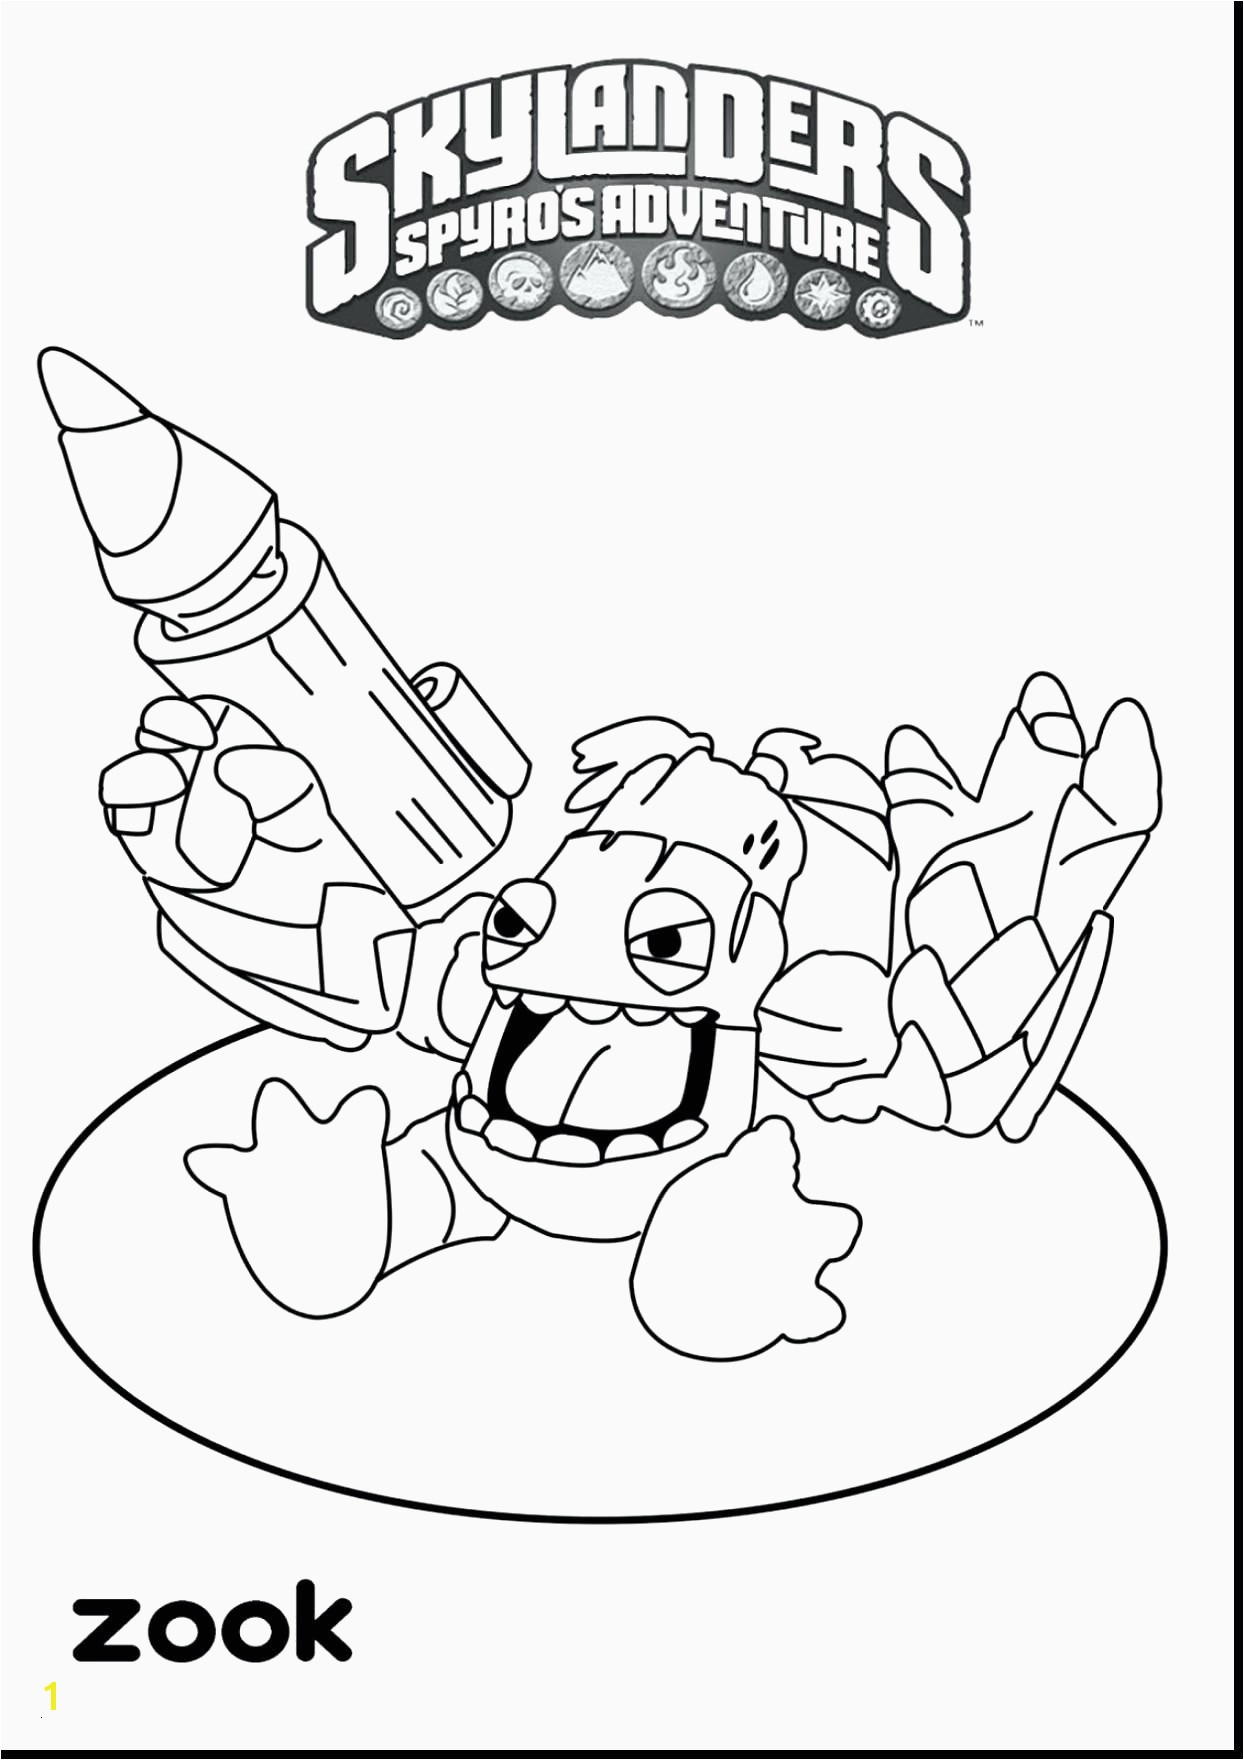 Cool Coloring Page Inspirational Witch Coloring Pages New Crayola Pages 0d Coloring Page Awesome Valentines